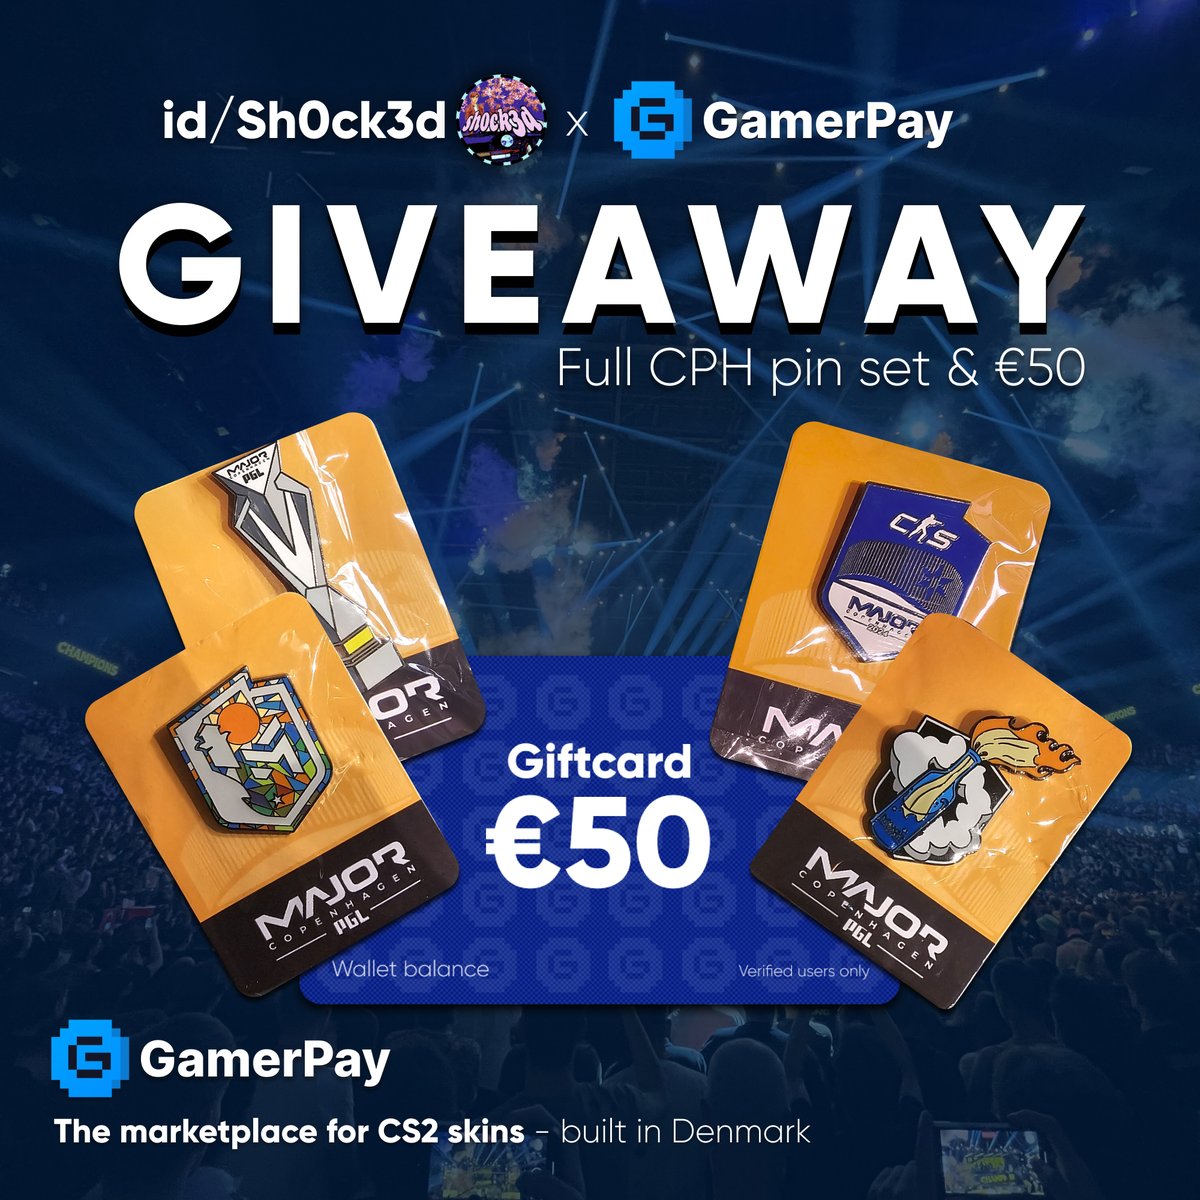 CPH Major Pins GIVEAWAY!📌💰

We want to celebrate that GamerPay is up and running again. Therefore we will throw a cool giveaway for you all!💪

'id/sh0ck3d' has been kind enough to provide us with a full set of physical CPH Major Pins. On top of that, we throw in a €50